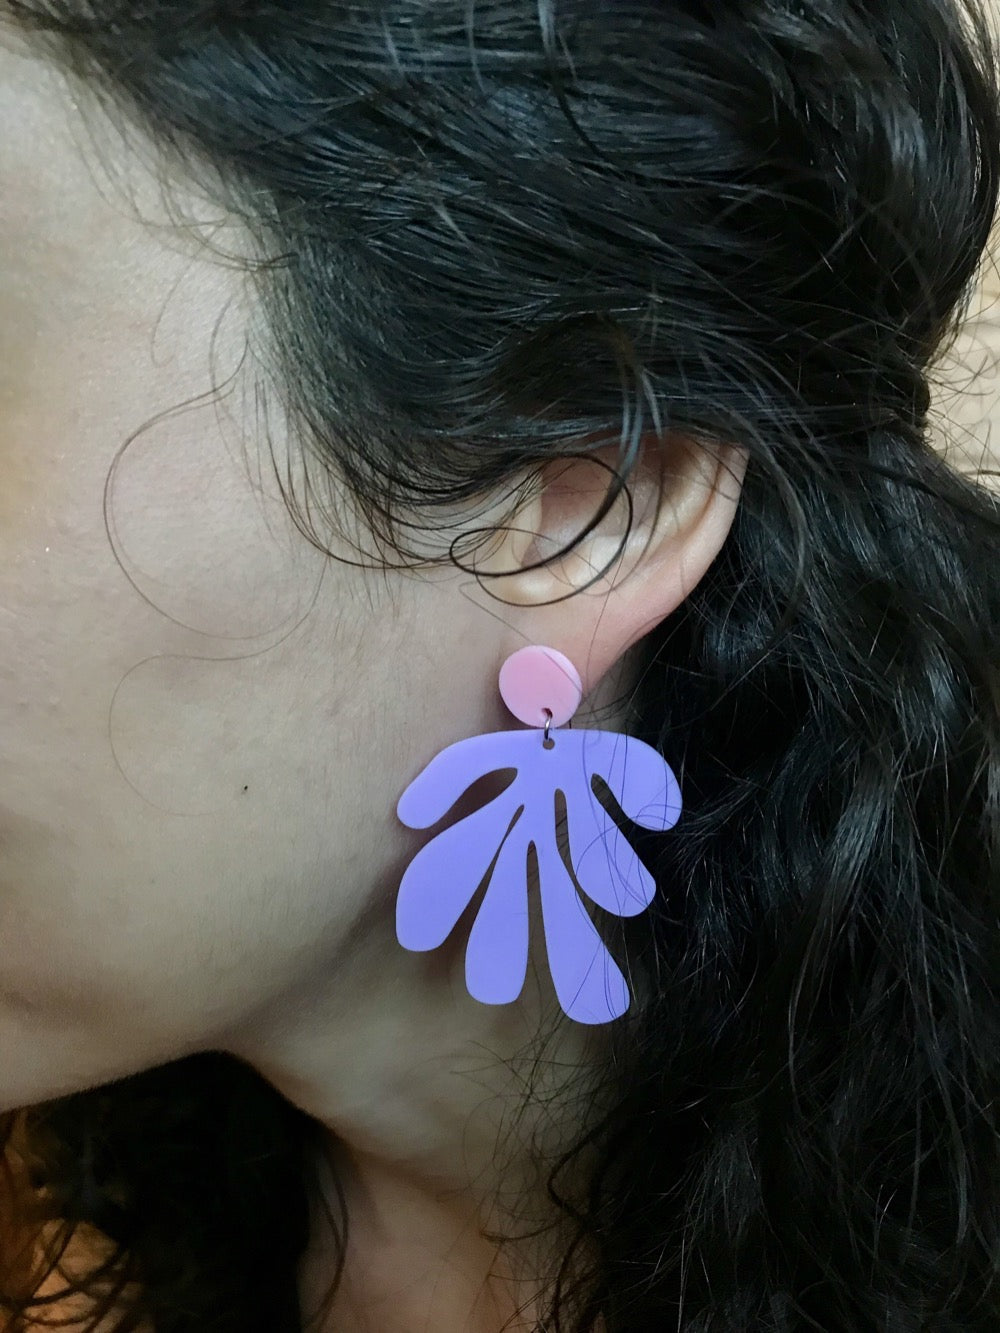 This is a close up of a woman's ear. She is wearing an R+D earring that has a circlar piece at the top linked to an abstract shape based on Matisse's cut out work. This earring is shown in light pink and light purple plant based filament. 